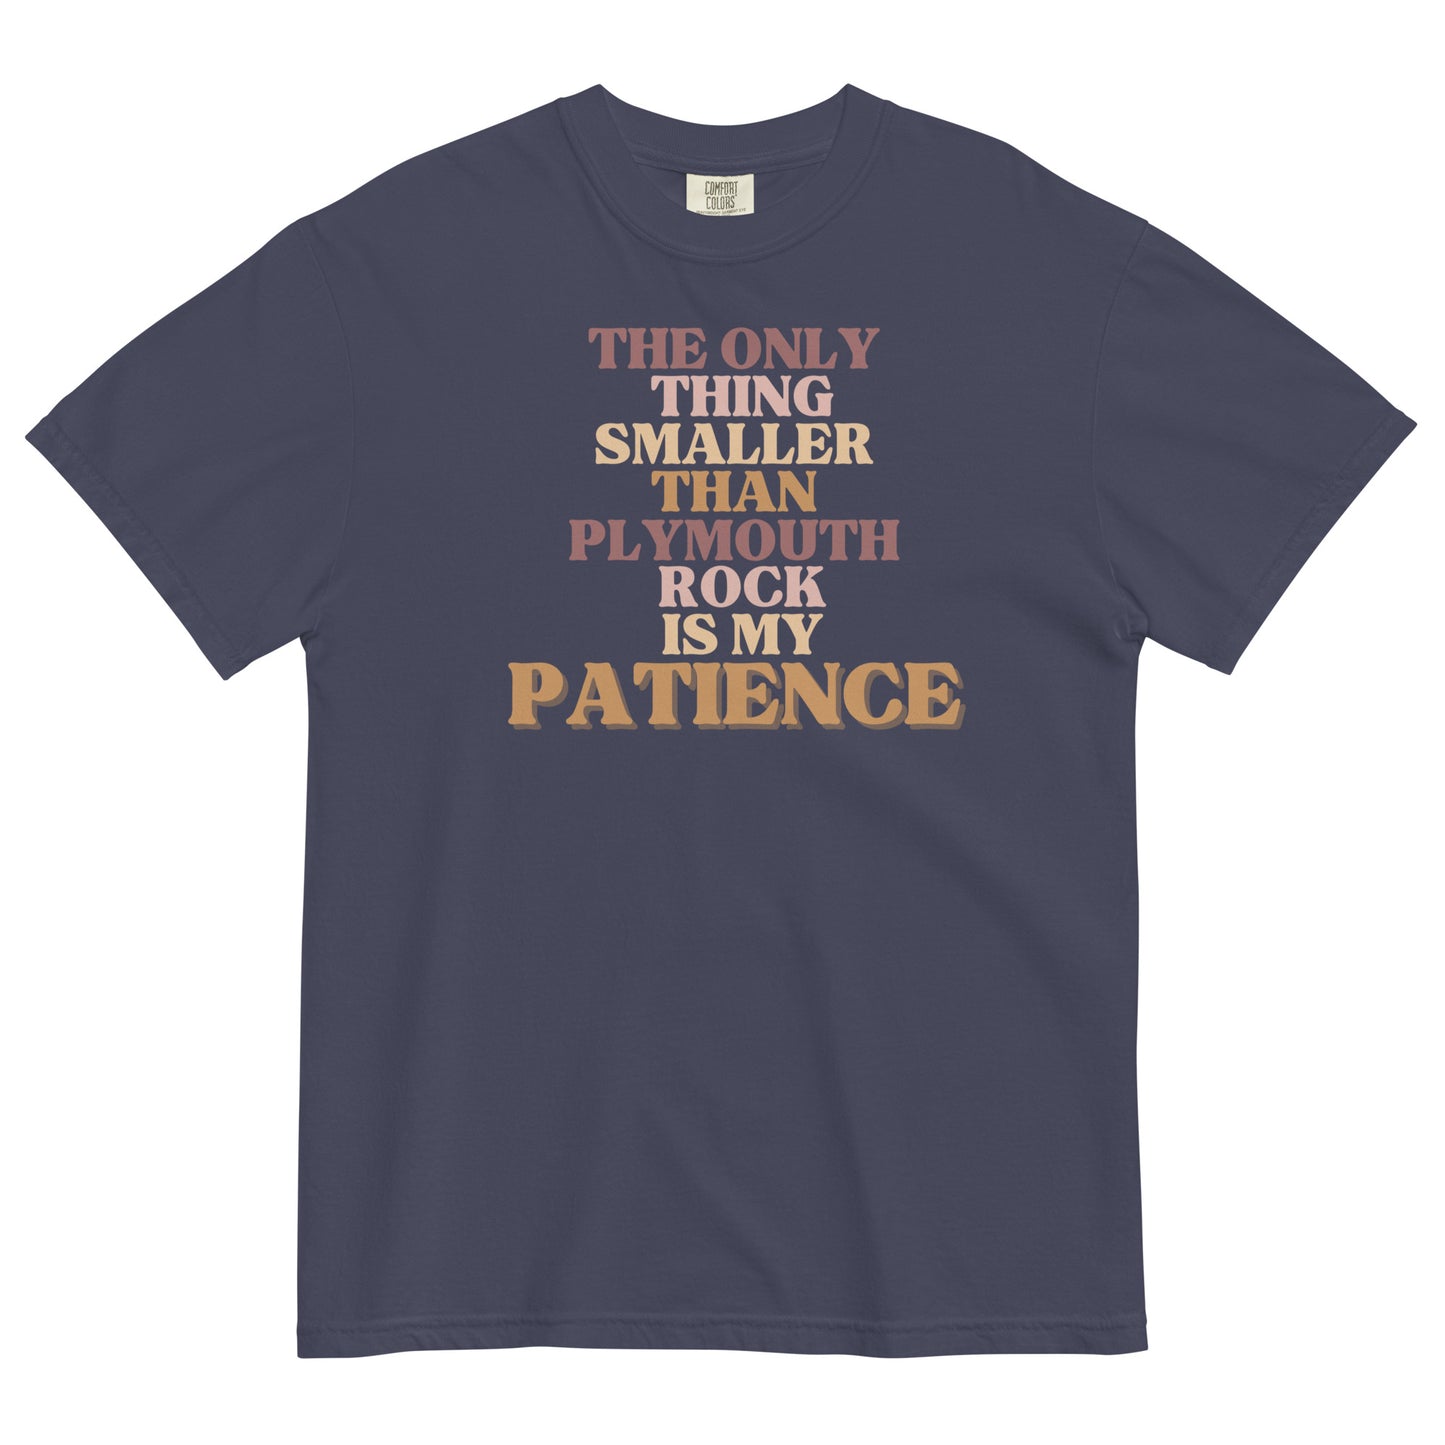 Plymouth Rock Patience T-Shirt